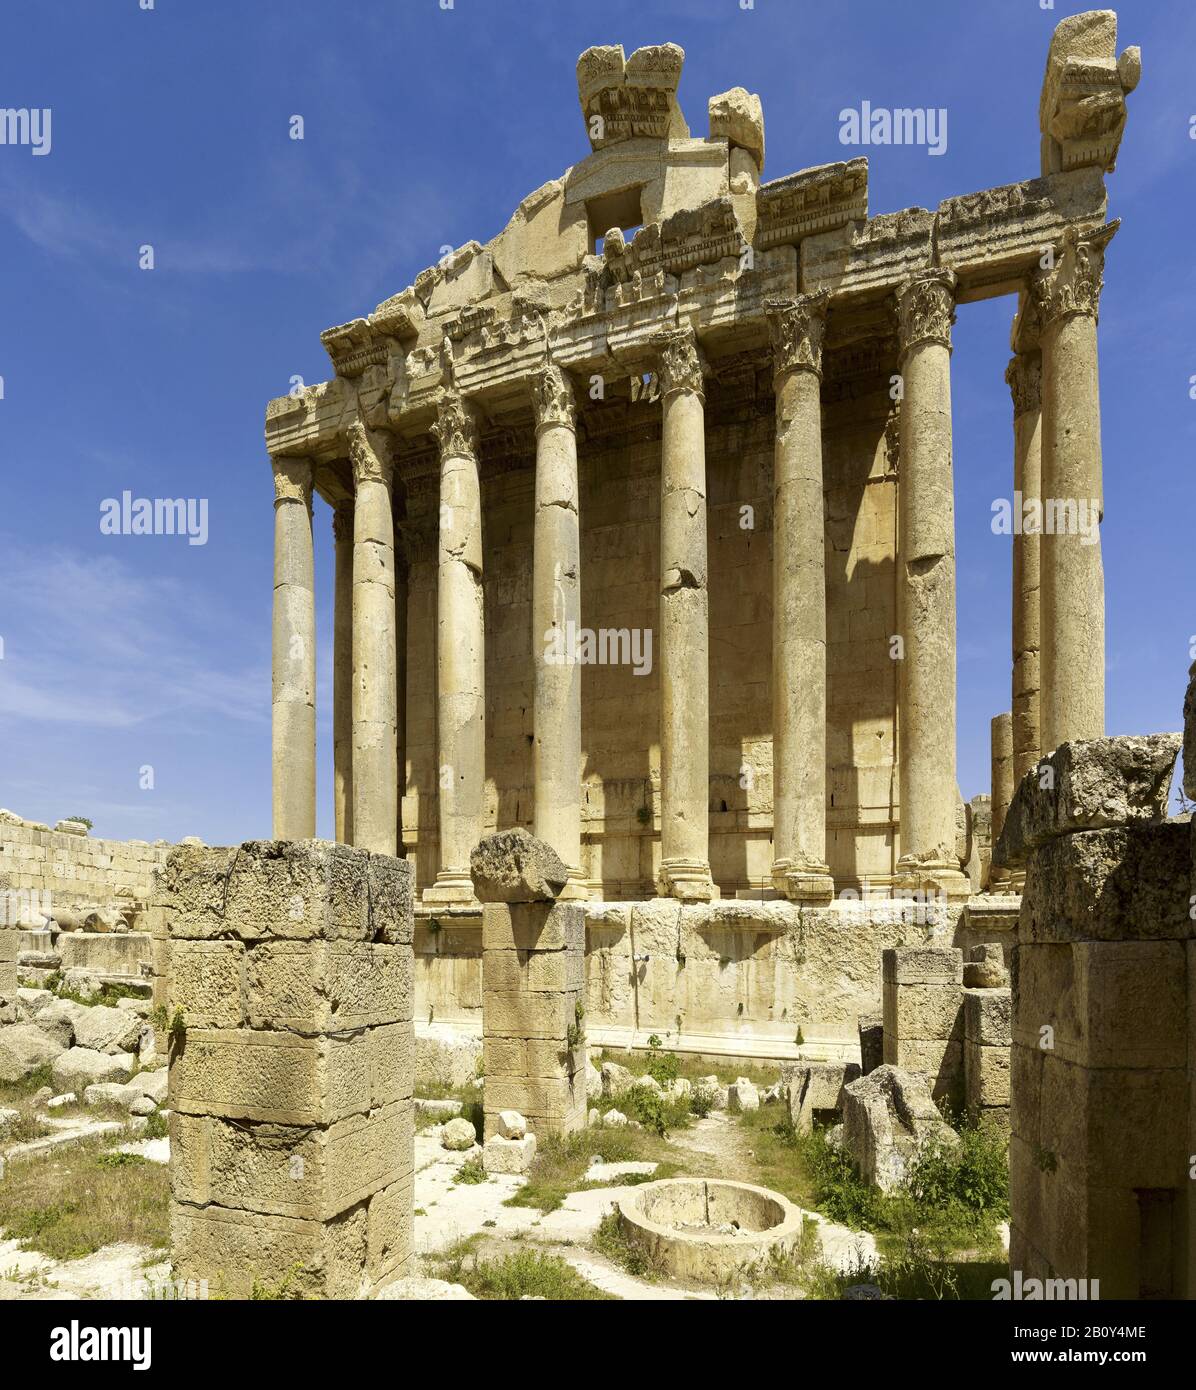 West facade, Bacchus temple in the ancient city of Baalbek, Lebanon, Stock Photo